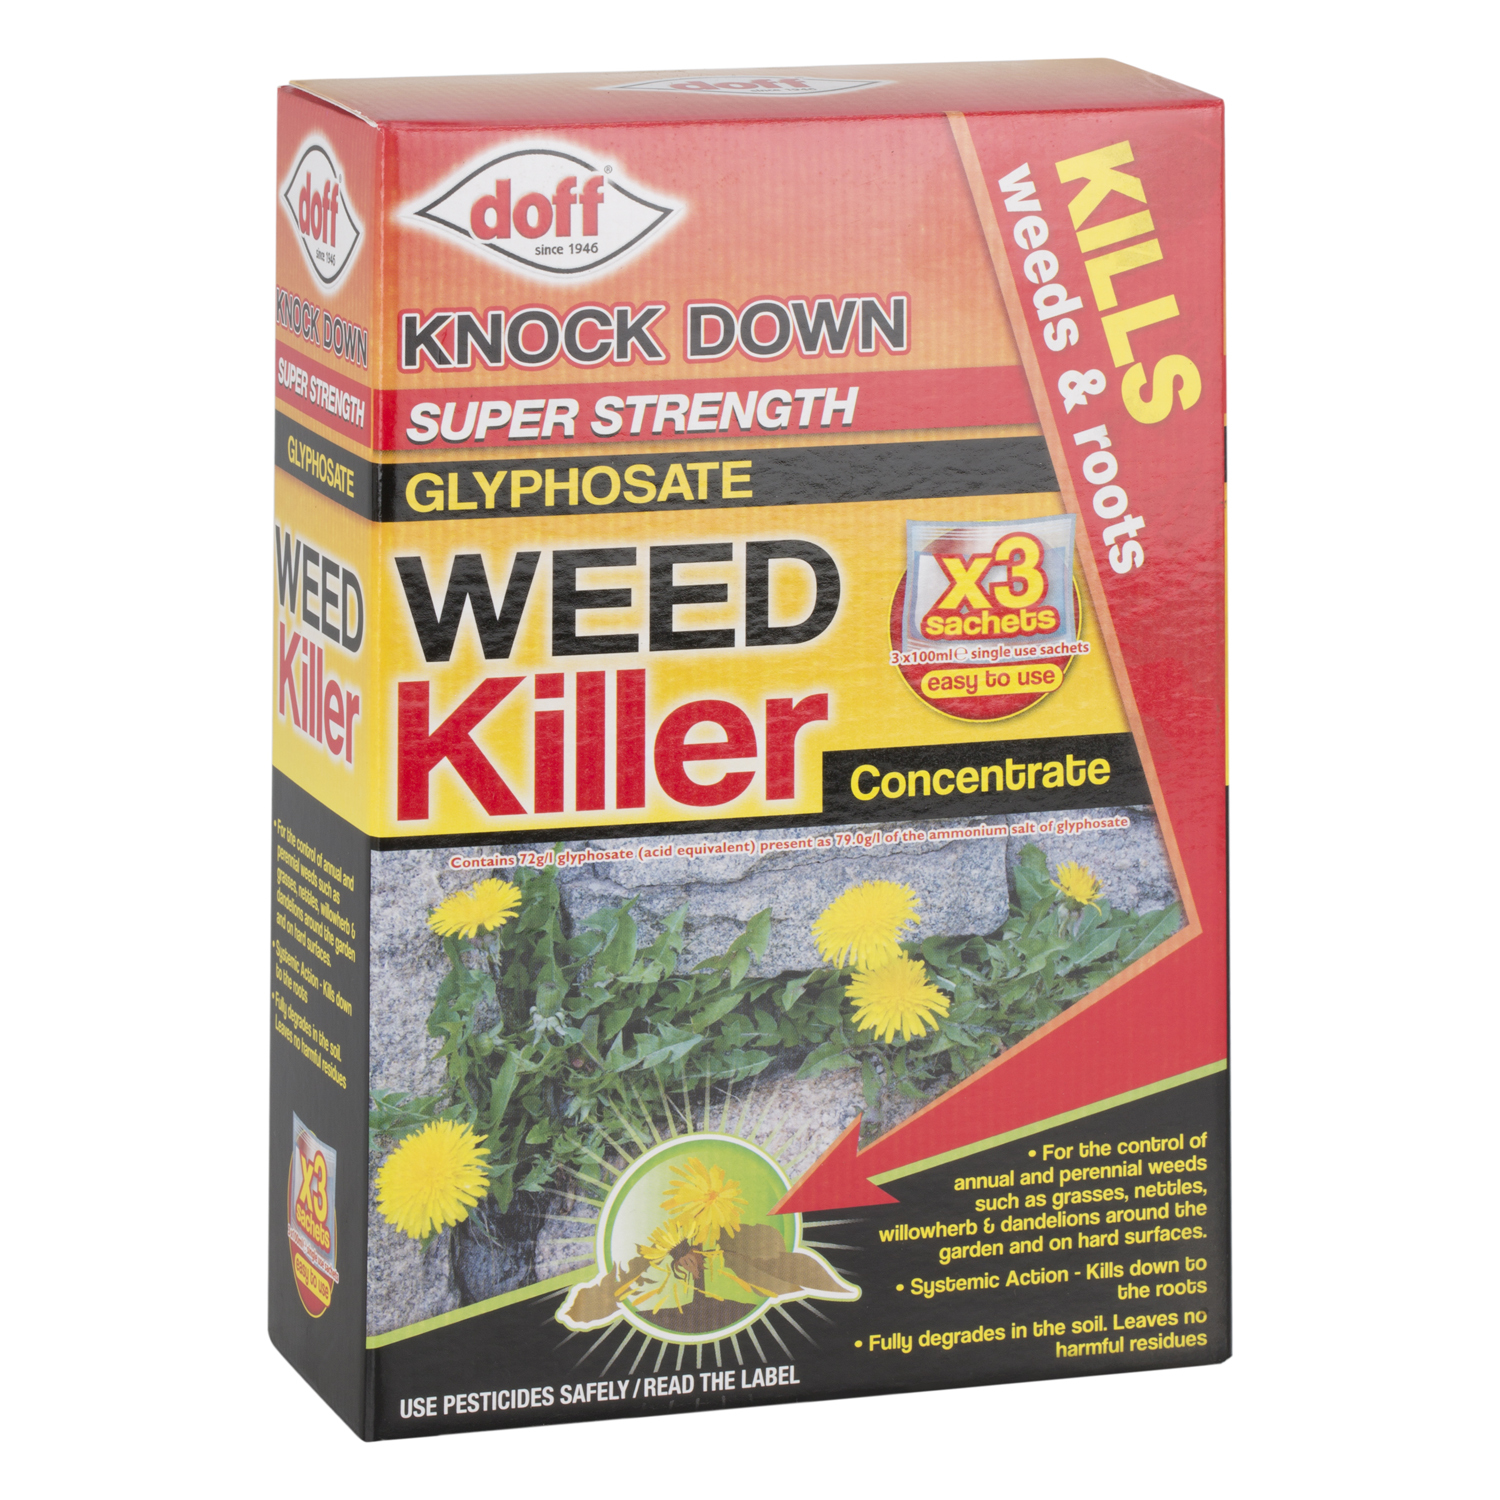 Doff Glyphosate Weed Killer Concentrate Sachets Image